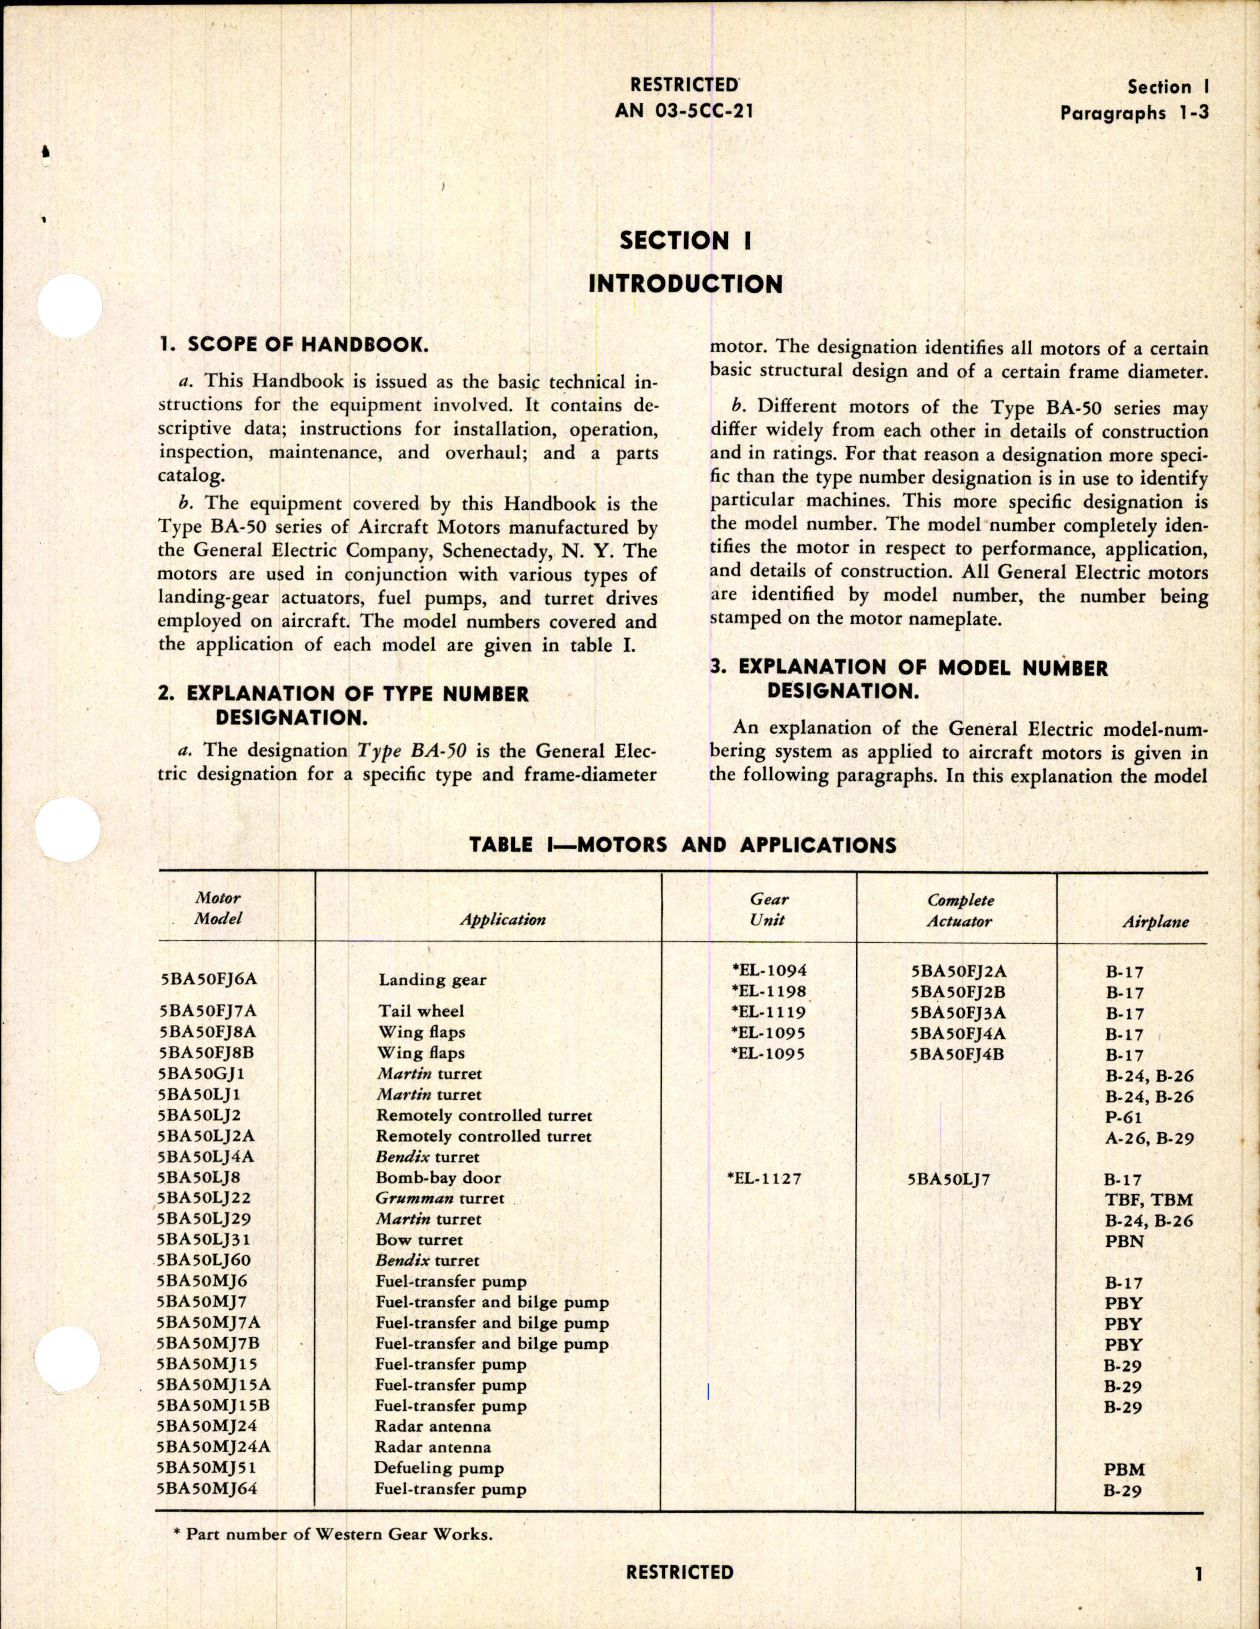 Sample page 3 from AirCorps Library document: Handbook of Instructions w/ Parts Catalog for Model 5BA50 Electric Motors